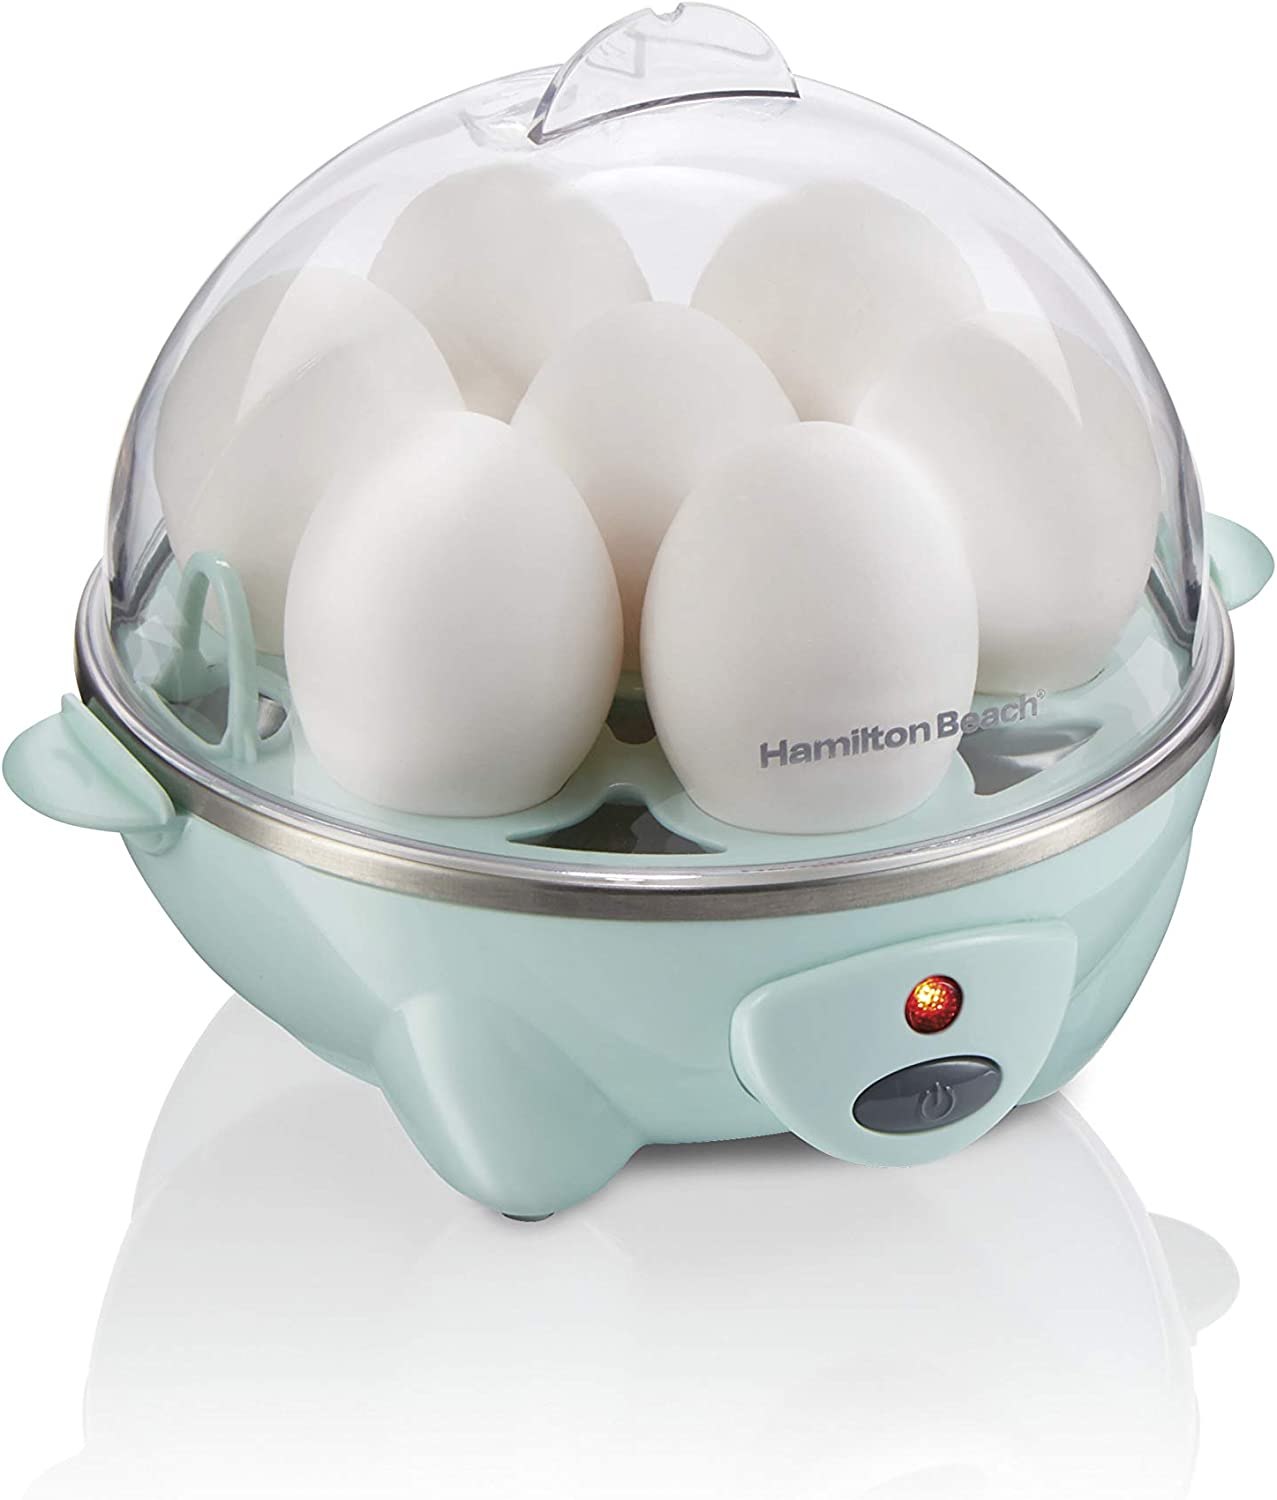 Dash Rapid Egg Cooker With Auto Shut Off Feature For Hard Boiled, Poached  And Scrambled Eggs, 12 Eggs Capacity - Gray : Target